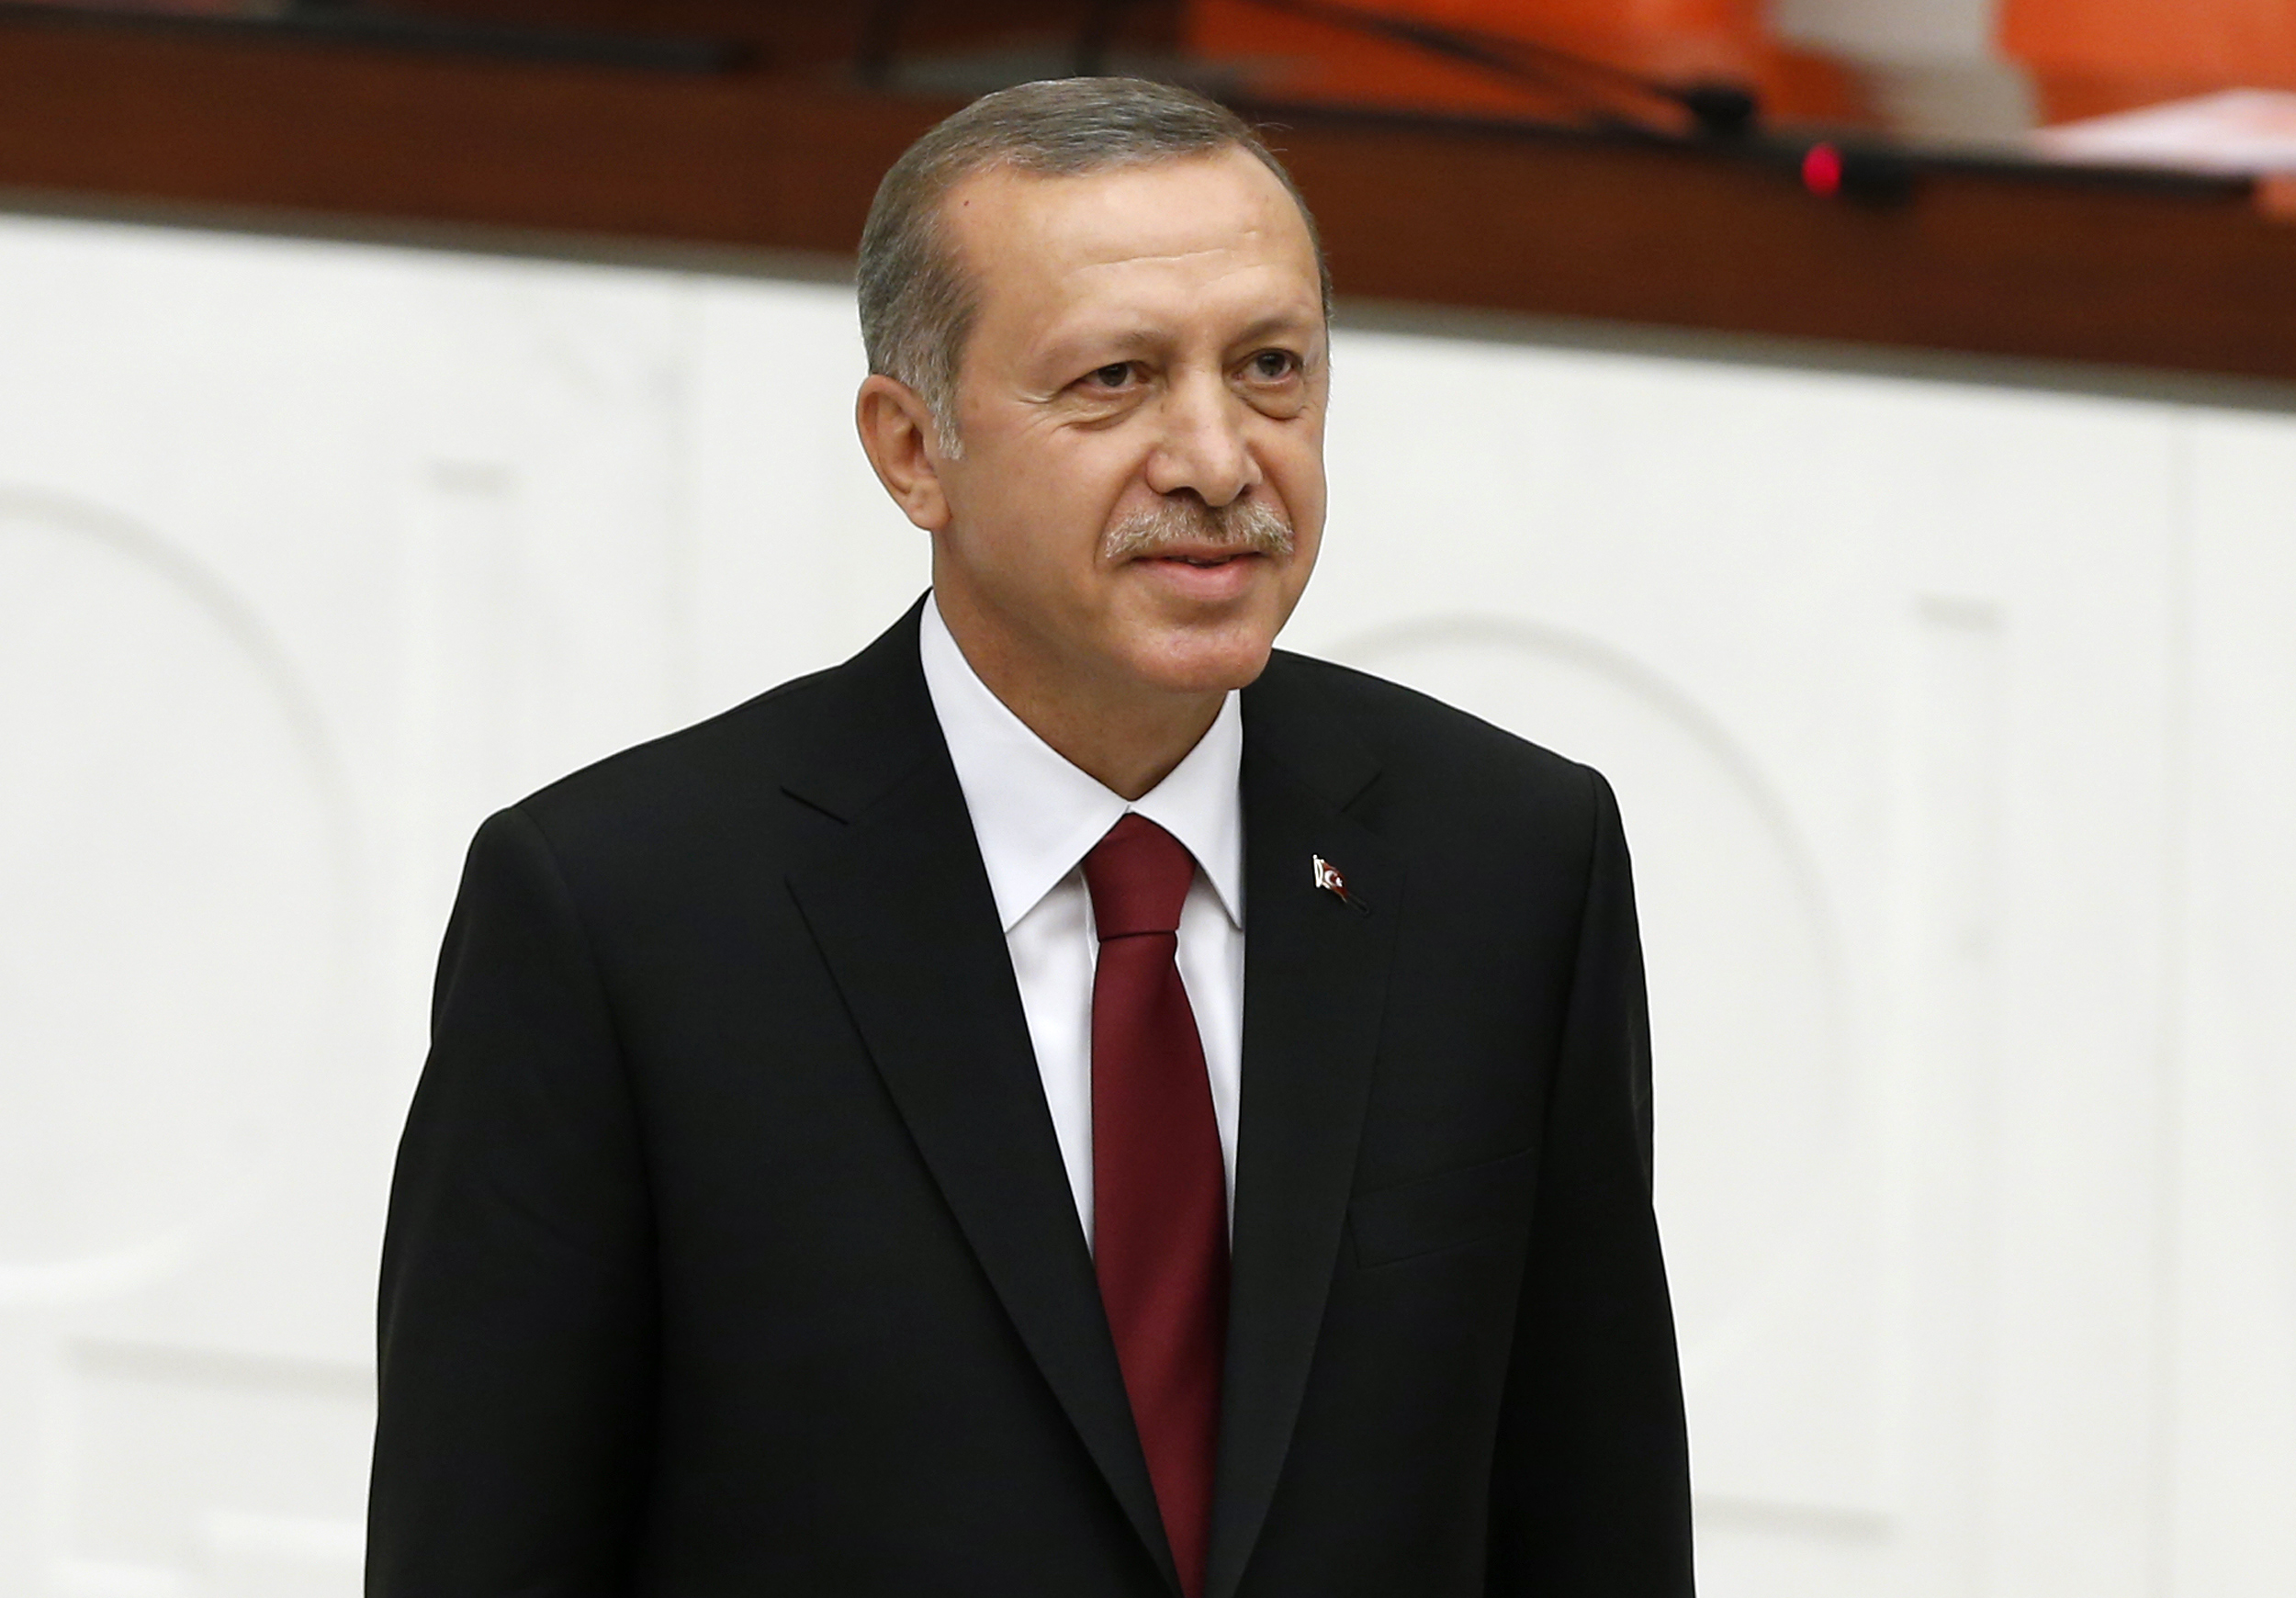 Turkey's new President Erdogan attends a swearing in ceremony at the parliament in Ankara